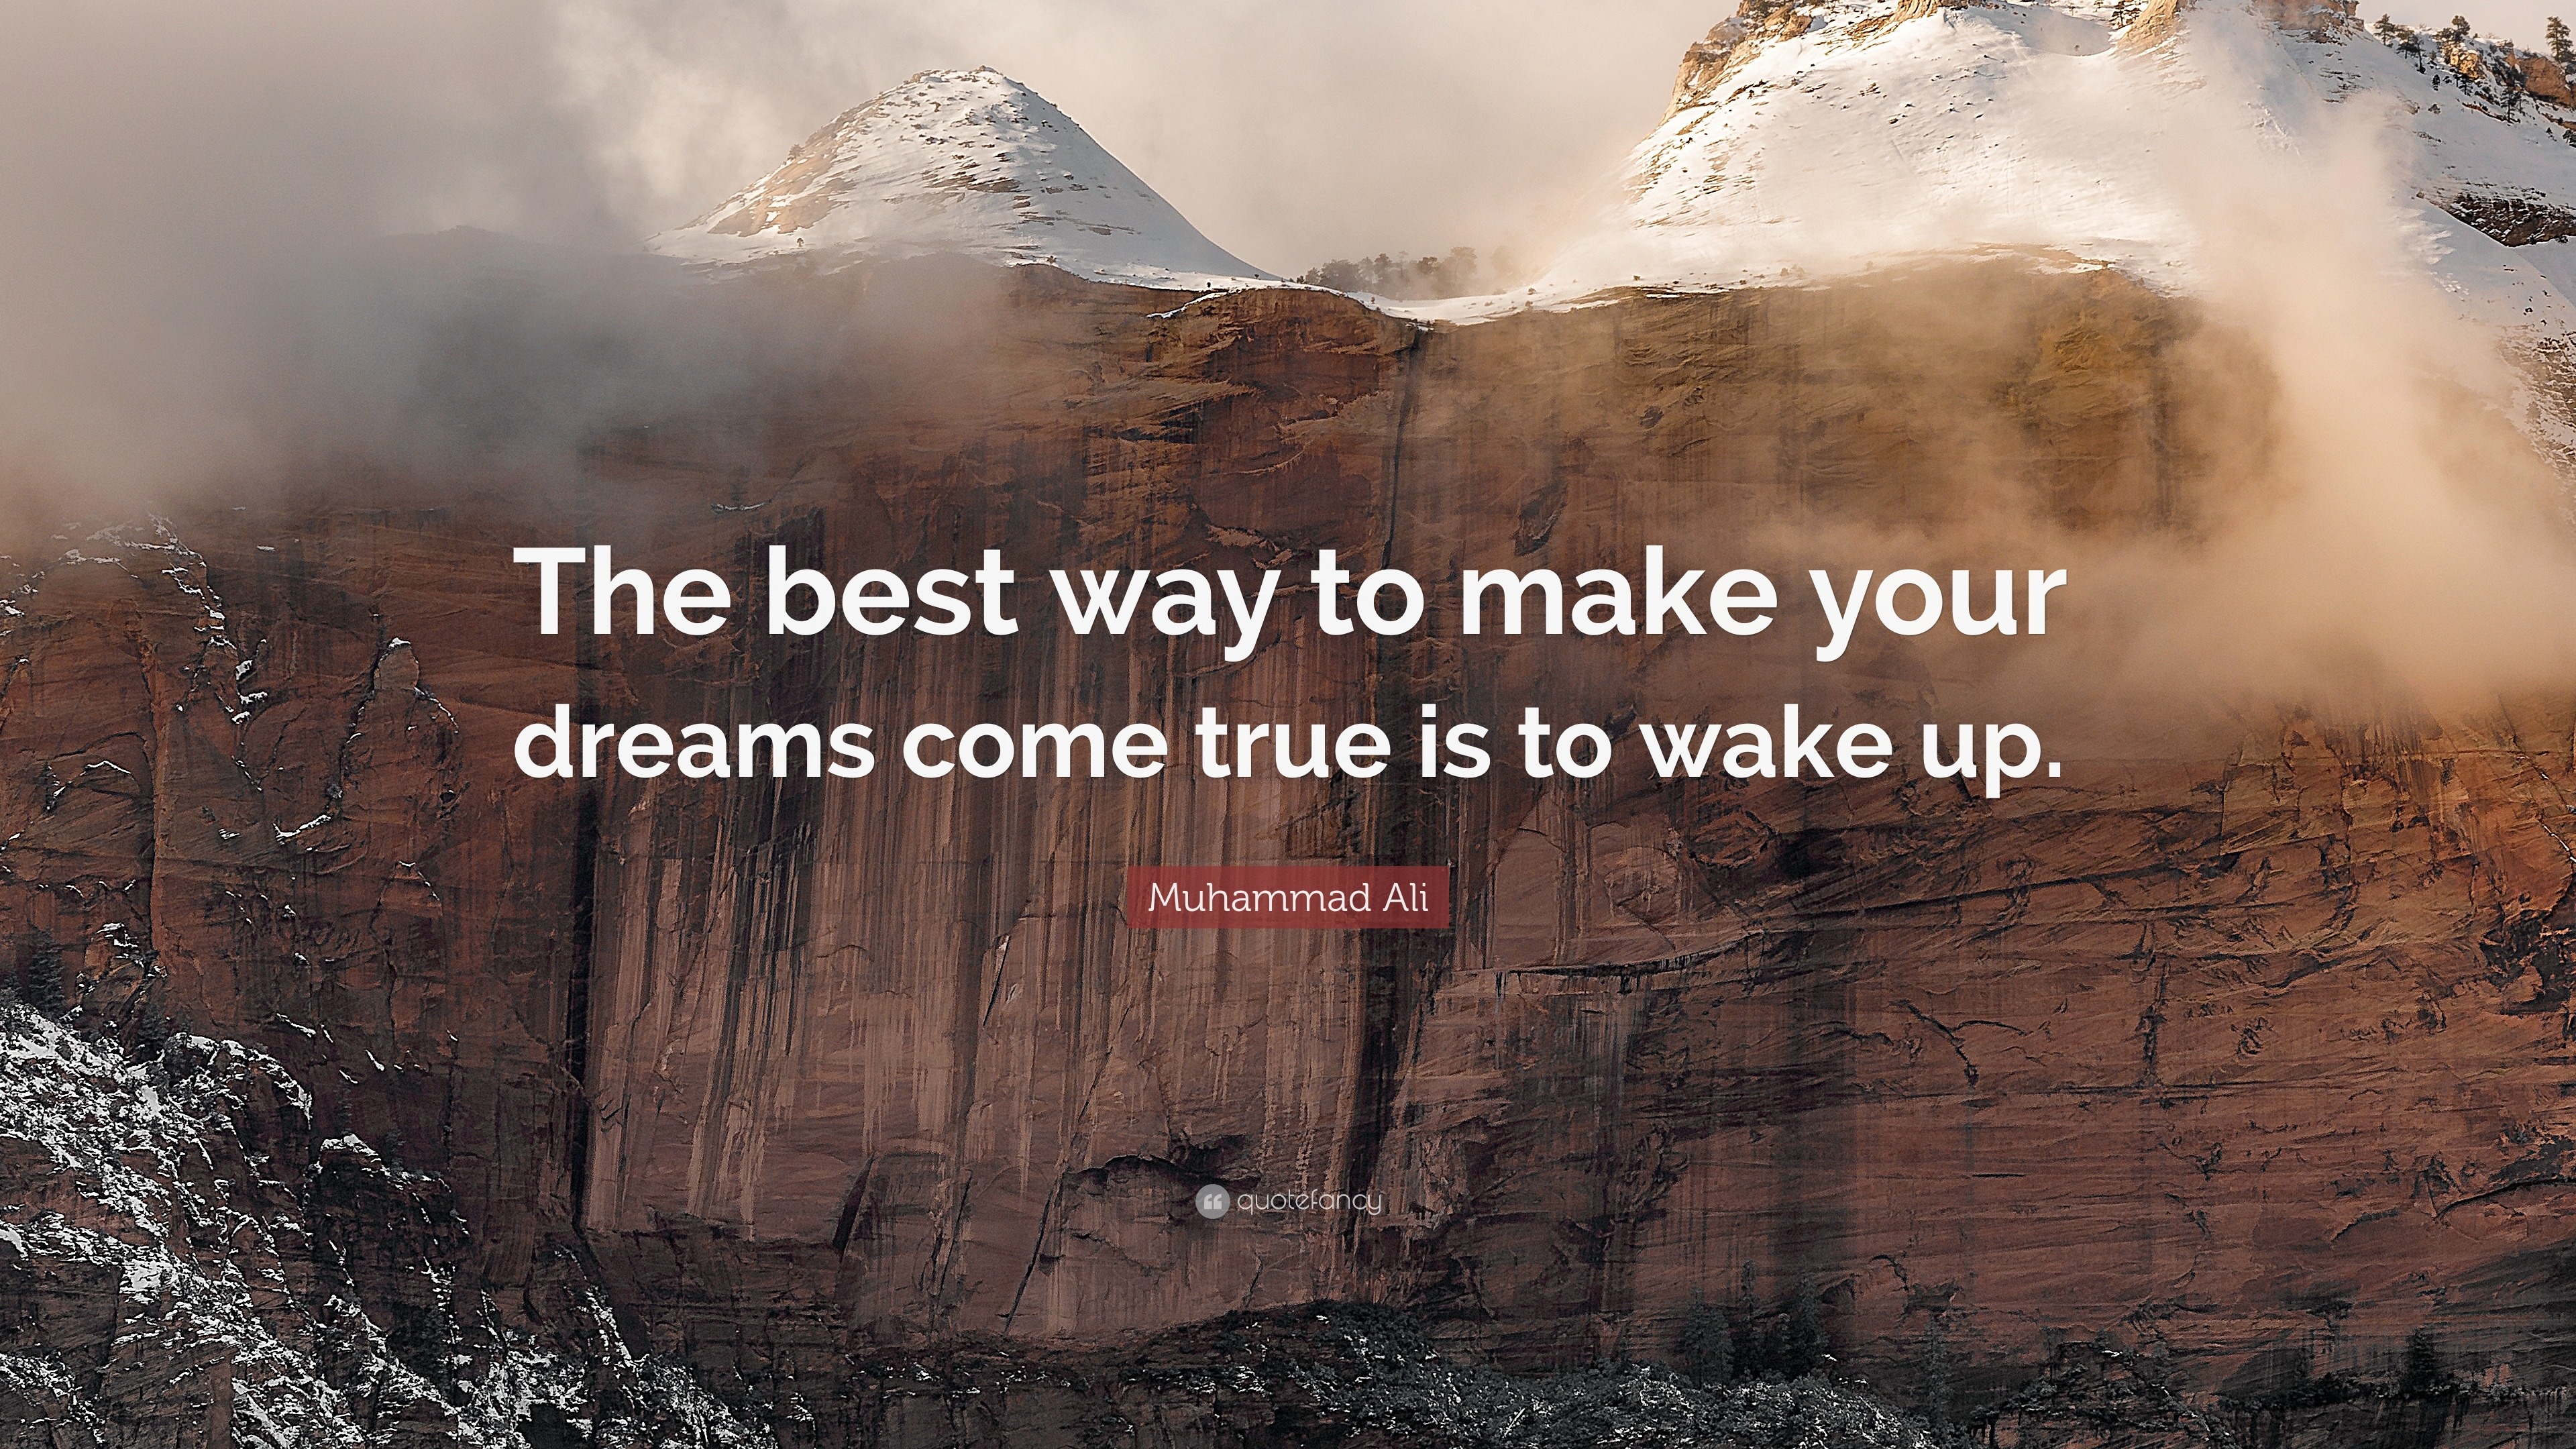 Muhammad Ali Quote: “The best way to make your dreams come true is to